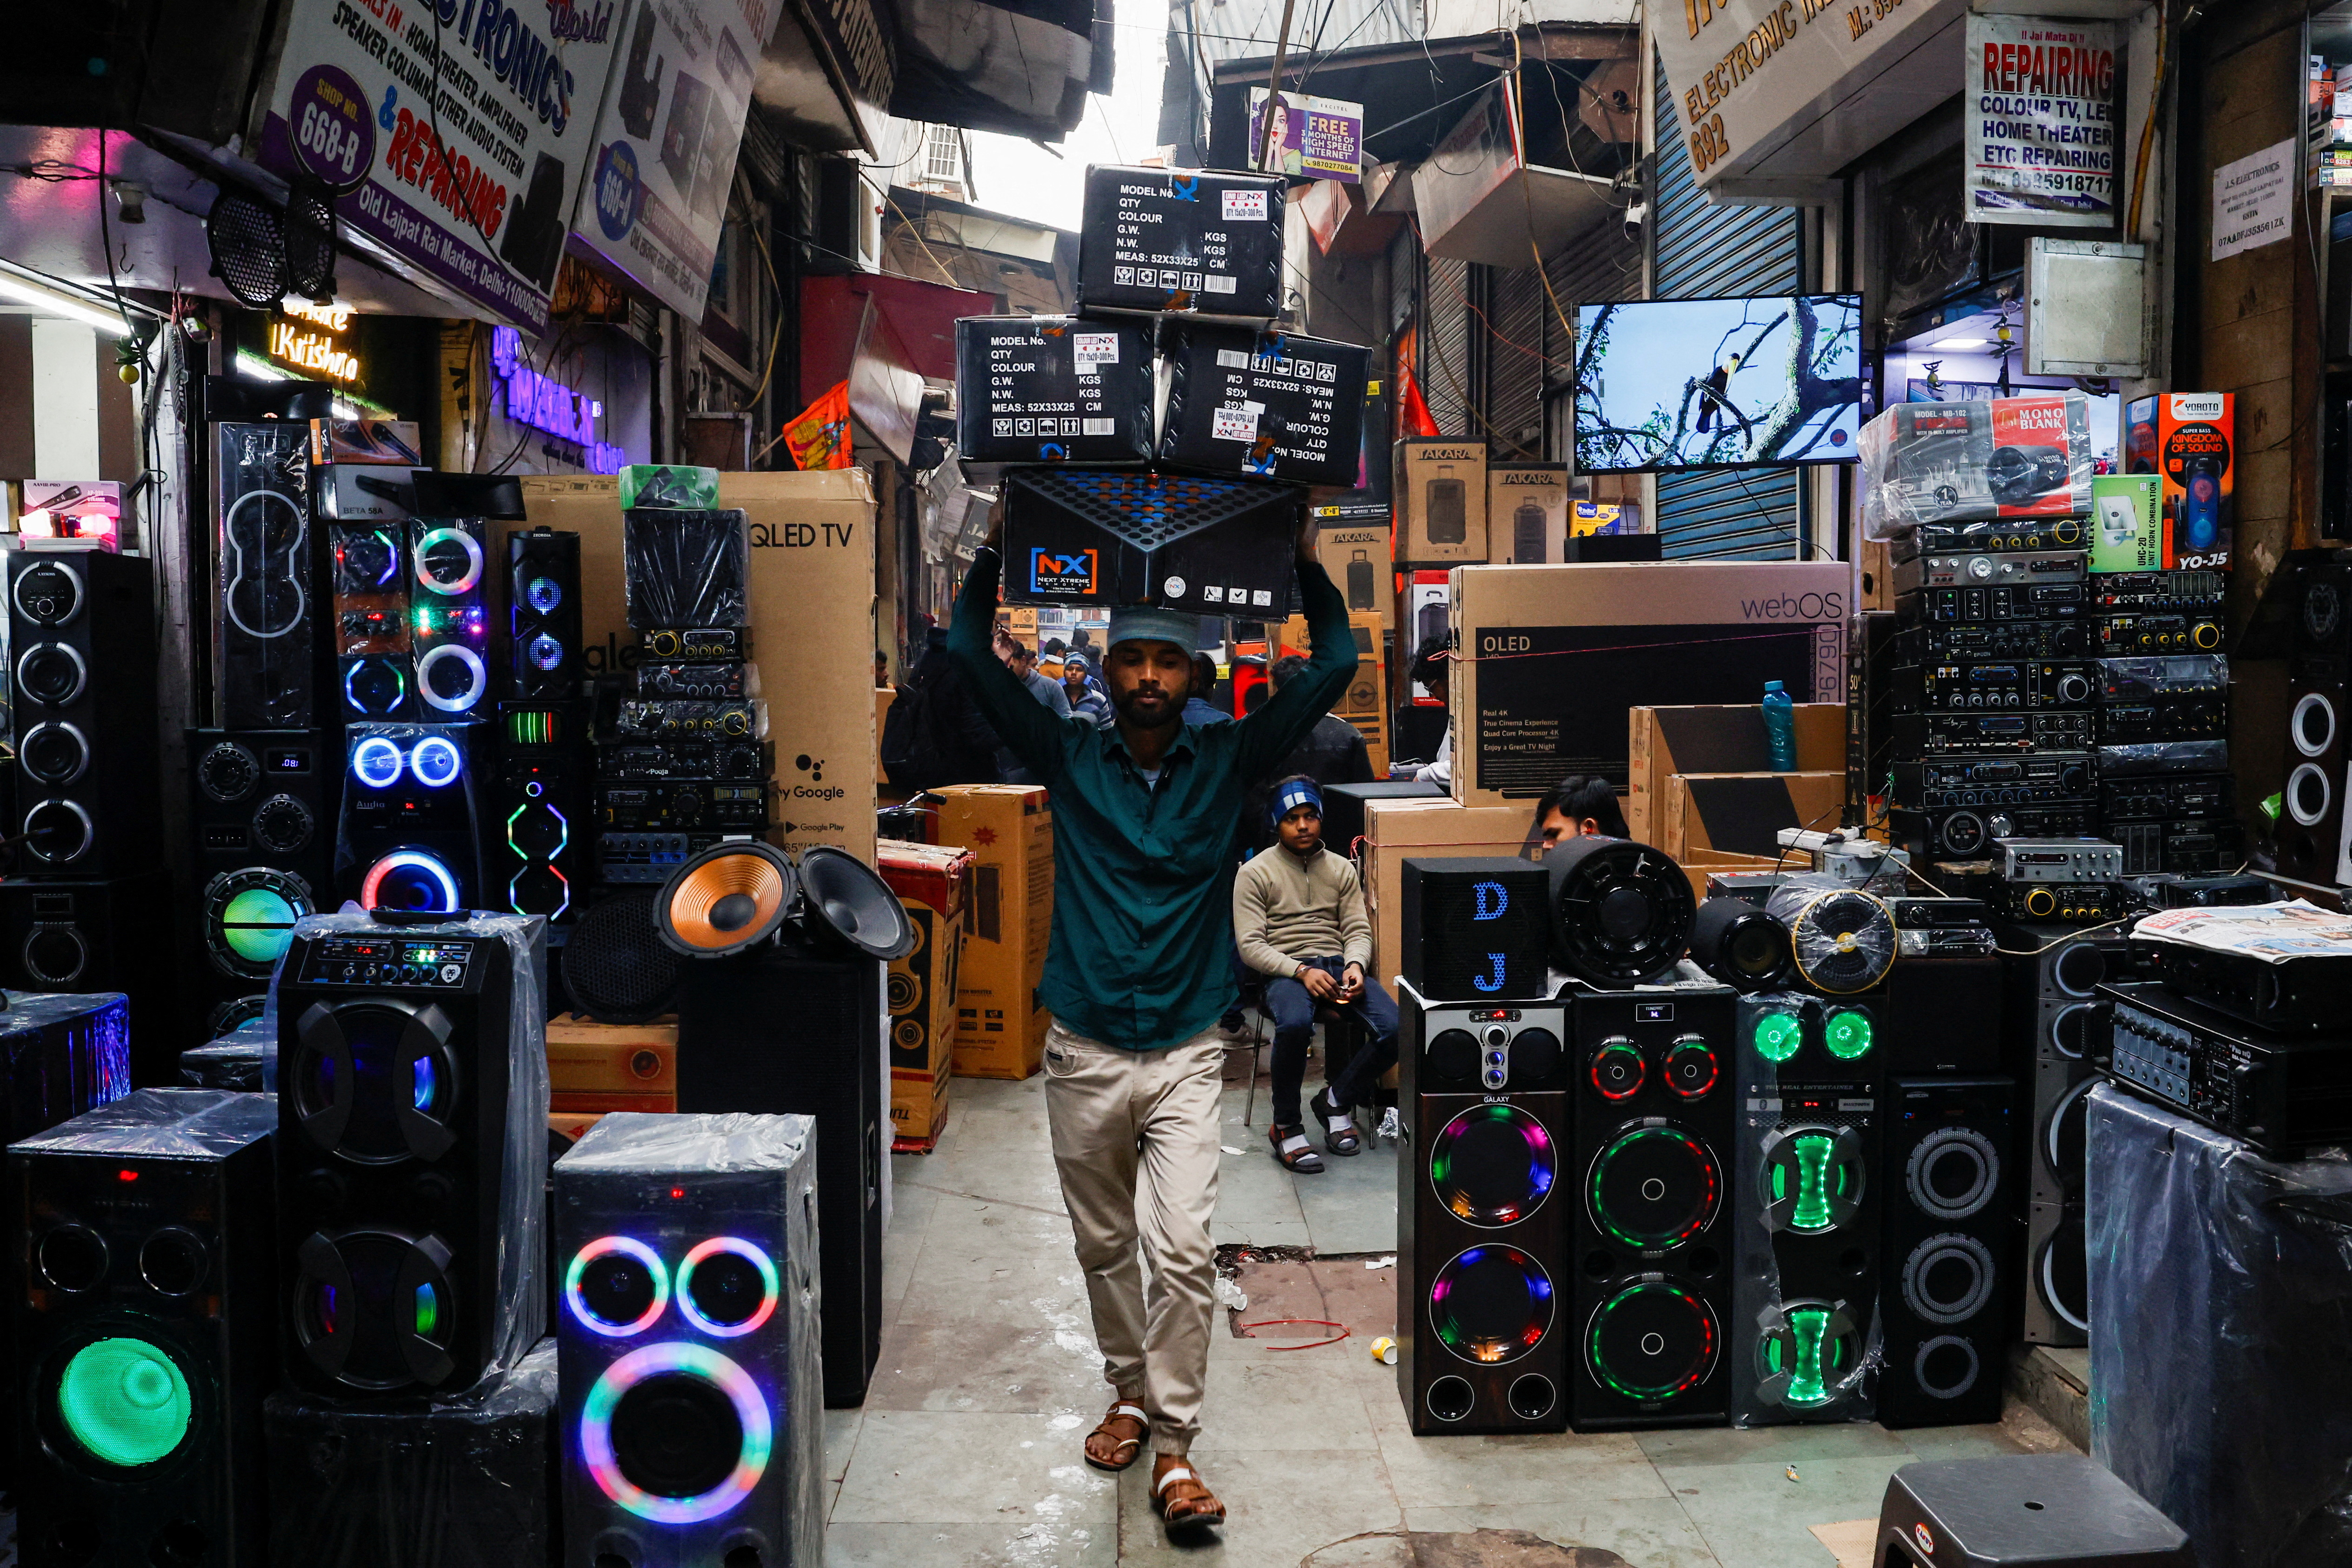 A labourer carries boxes past electronic gadgets on display at a wholesale market in the old quarters of Delhi